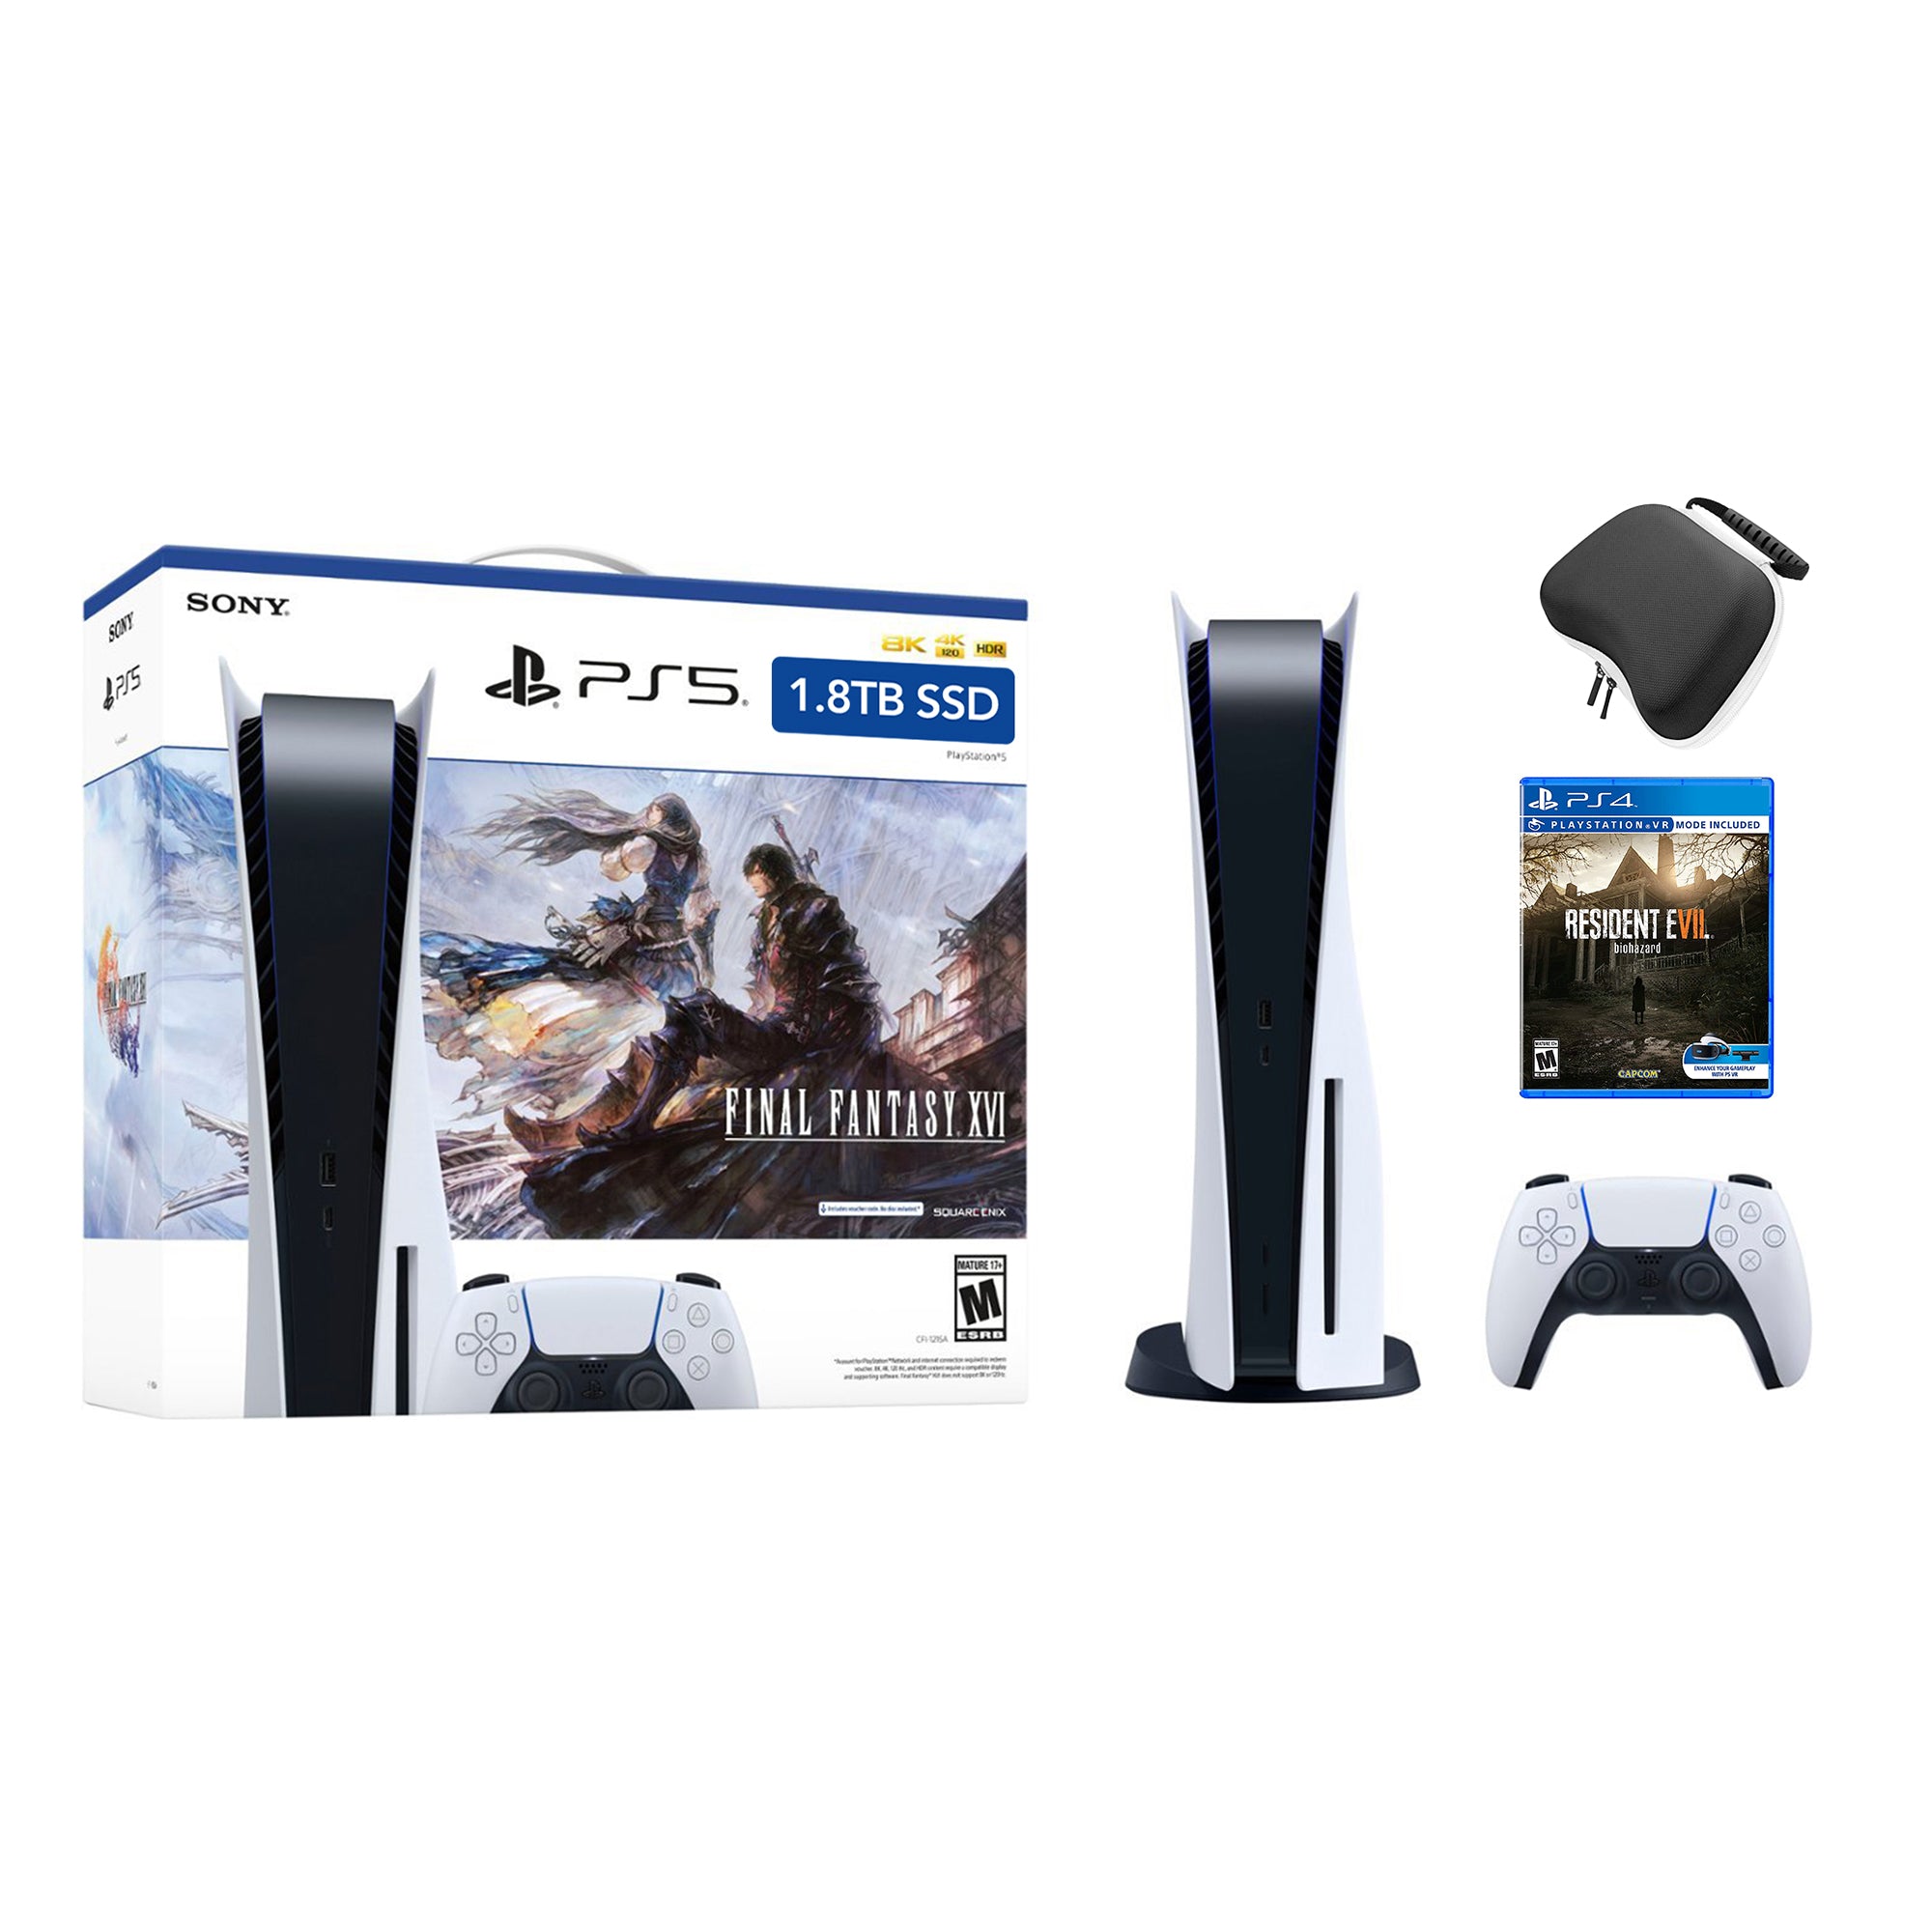 PlayStation 5 Upgraded 1.8TB Disc Edition FINAL FANTASY XVI Bundle with Resident Evil 7 and Mytrix Controller Case - PS5, White